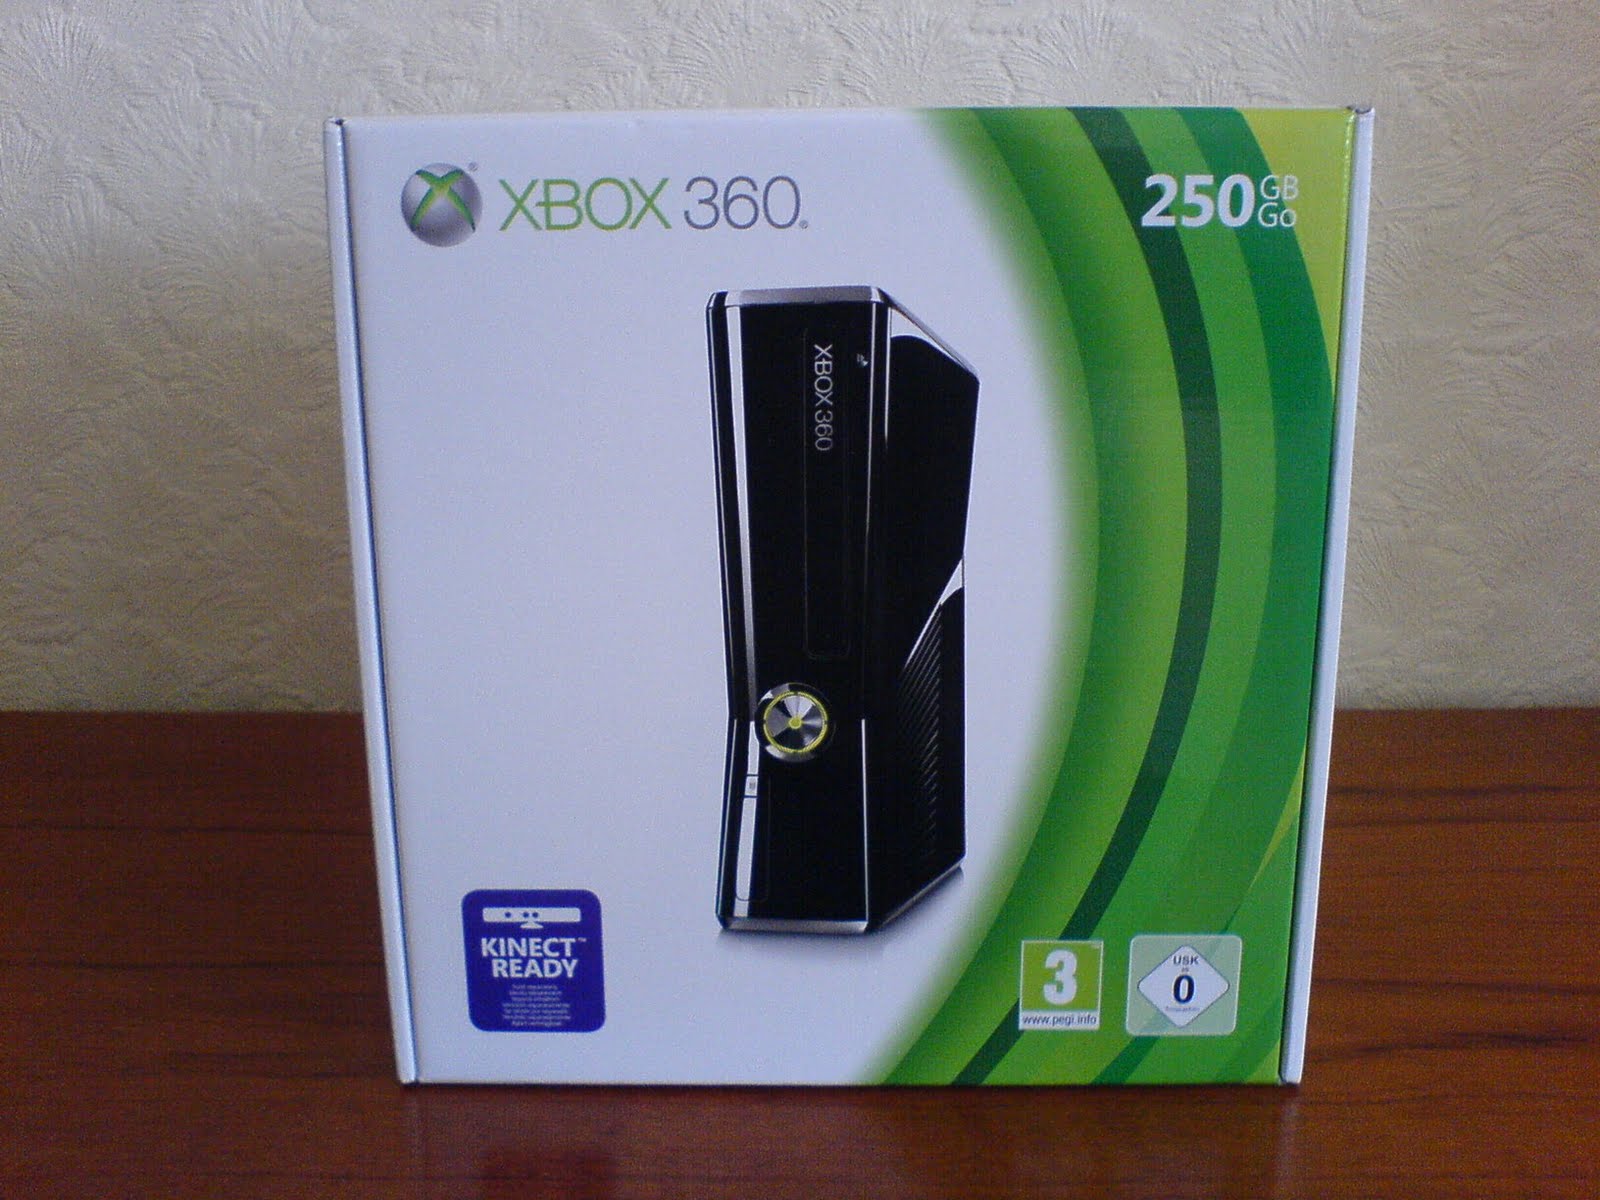 IQGamer: Feature: Hands-On With The Xbox 360 S